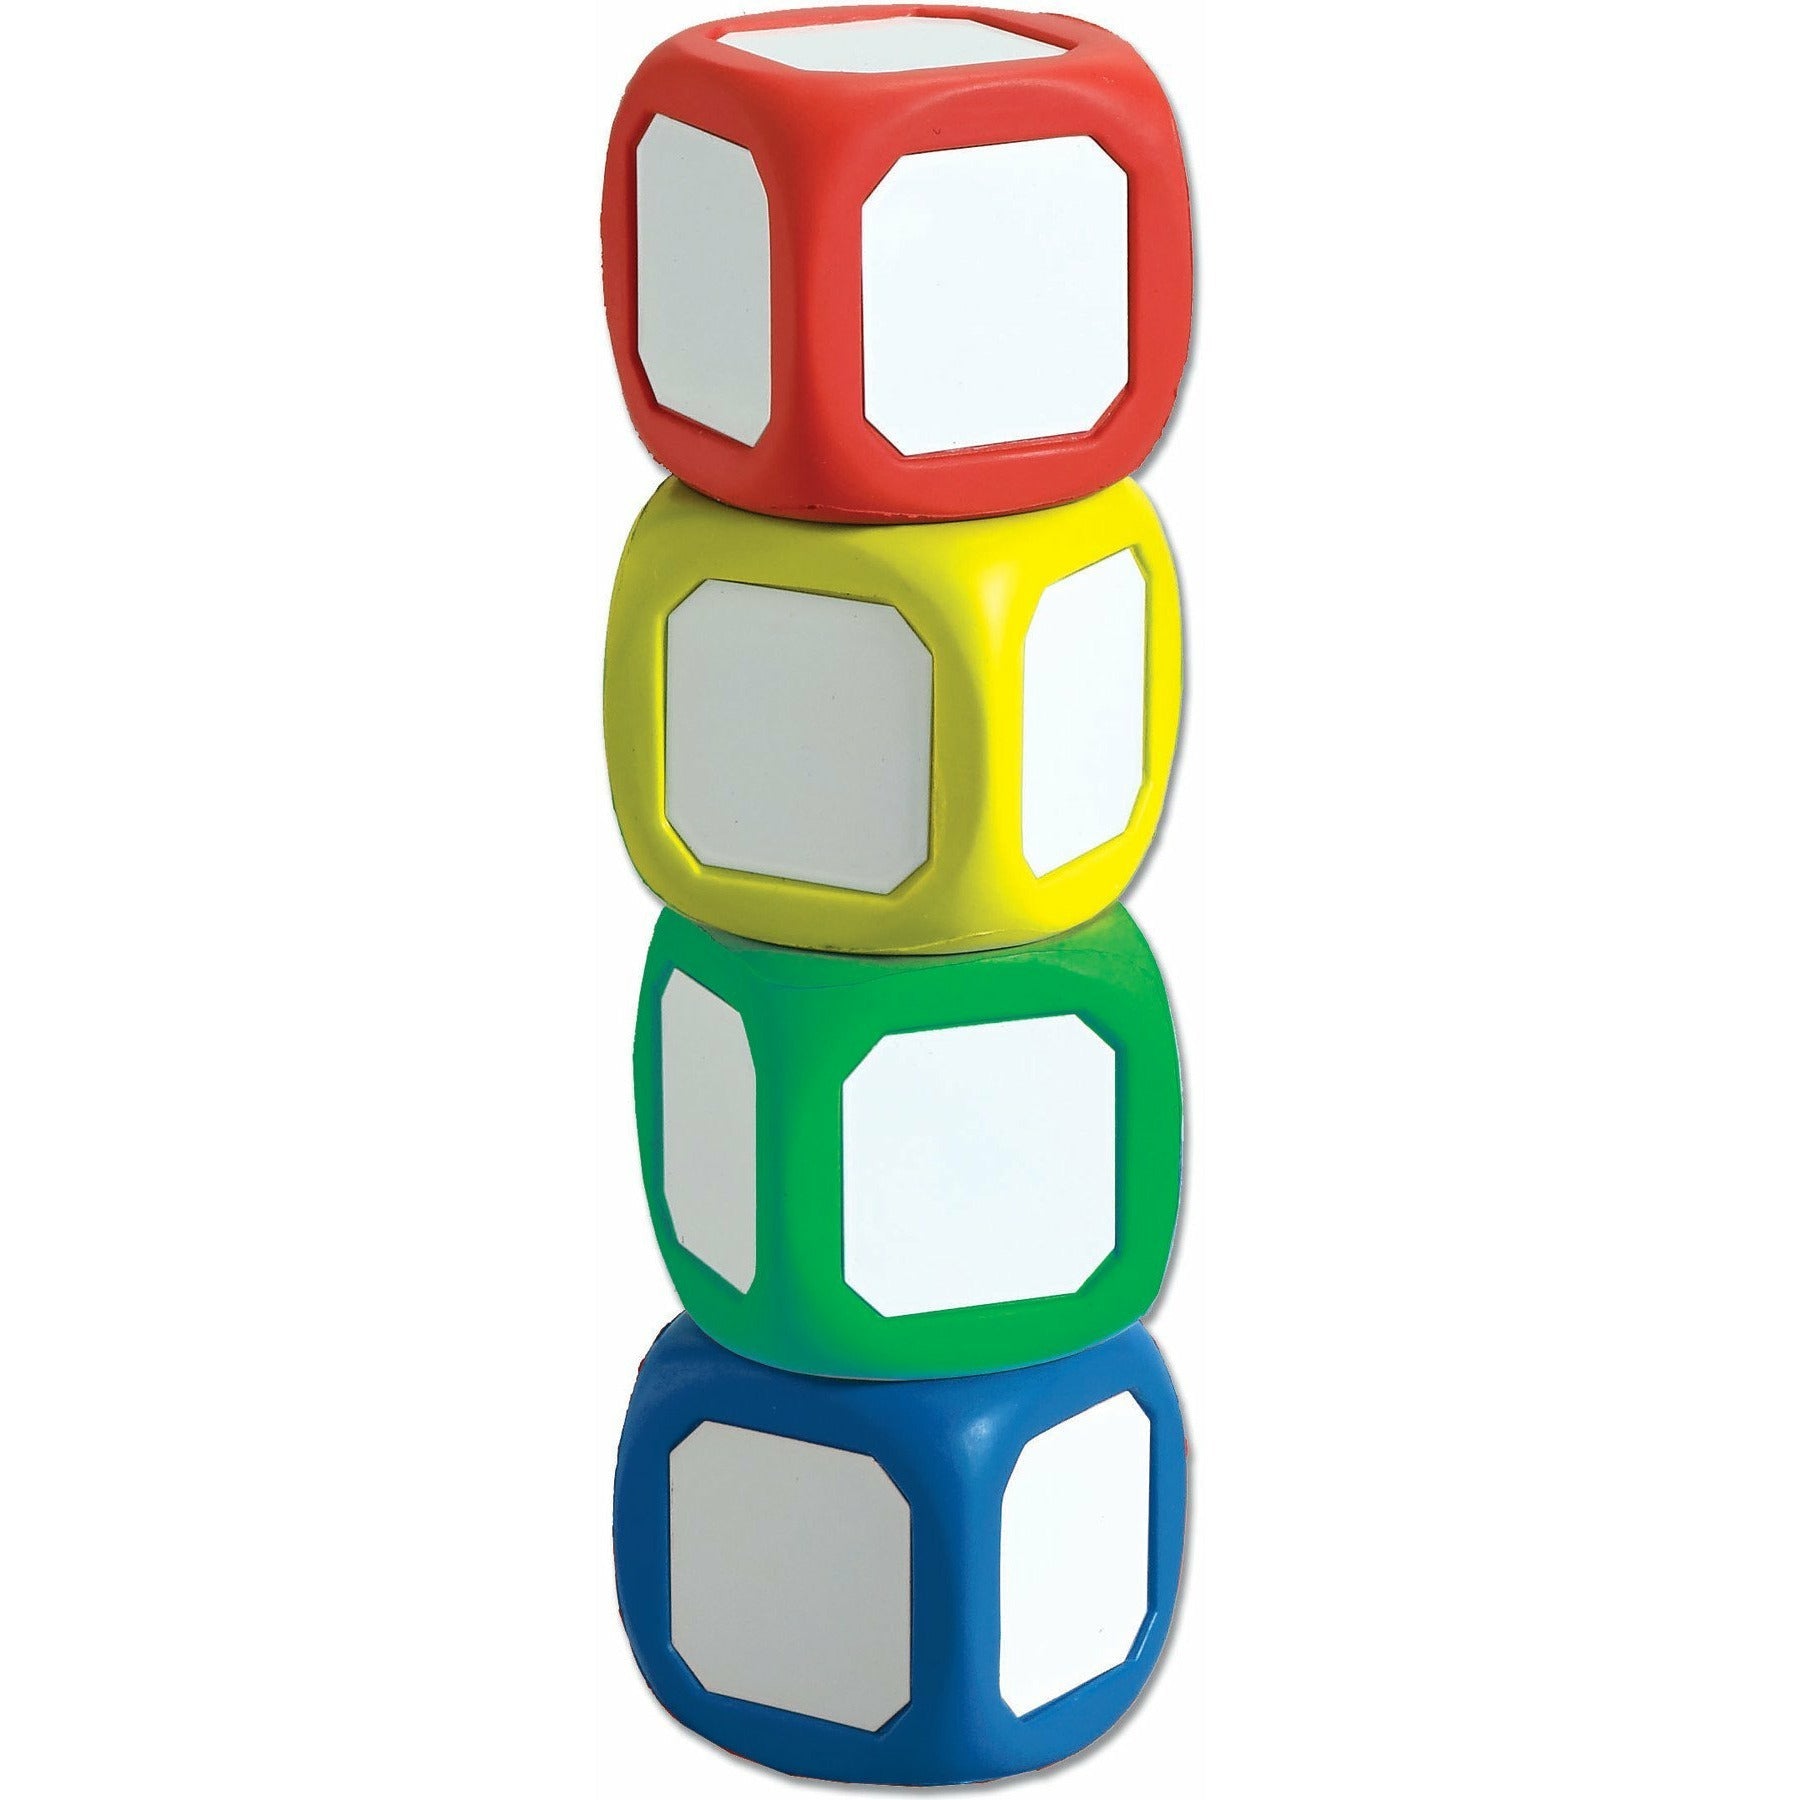 Magnetic Write-On Wipe-Off Dice, Set of 4 small dice in assorted colors